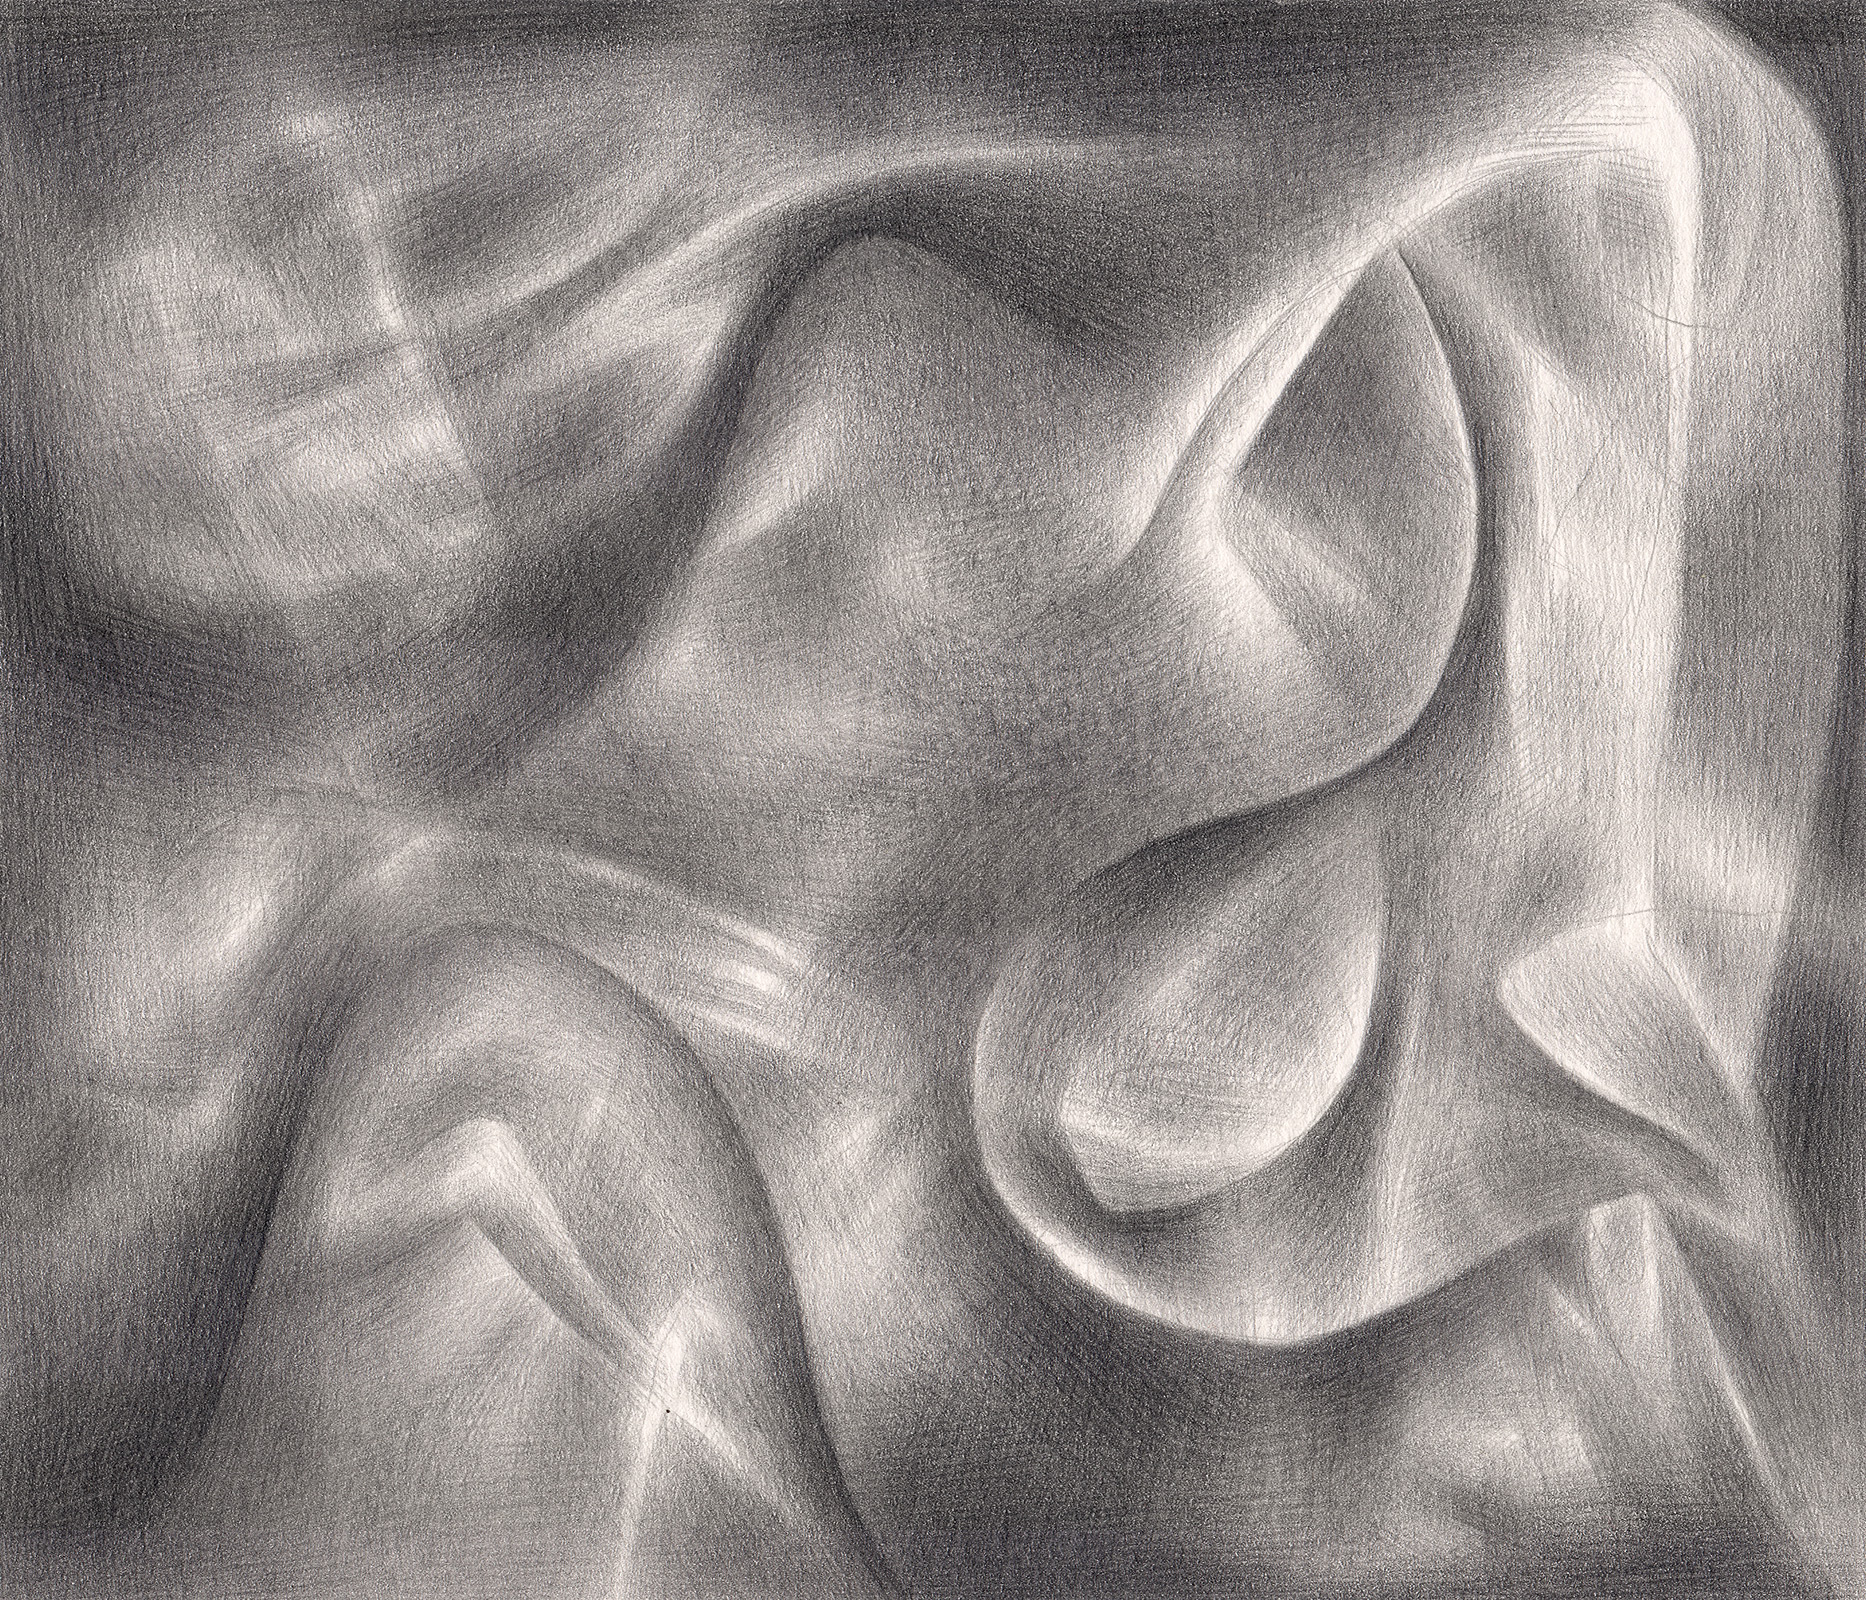   Friends Made of Smoke &amp; Light , 2007. Graphite on paper. 7" x 6". 